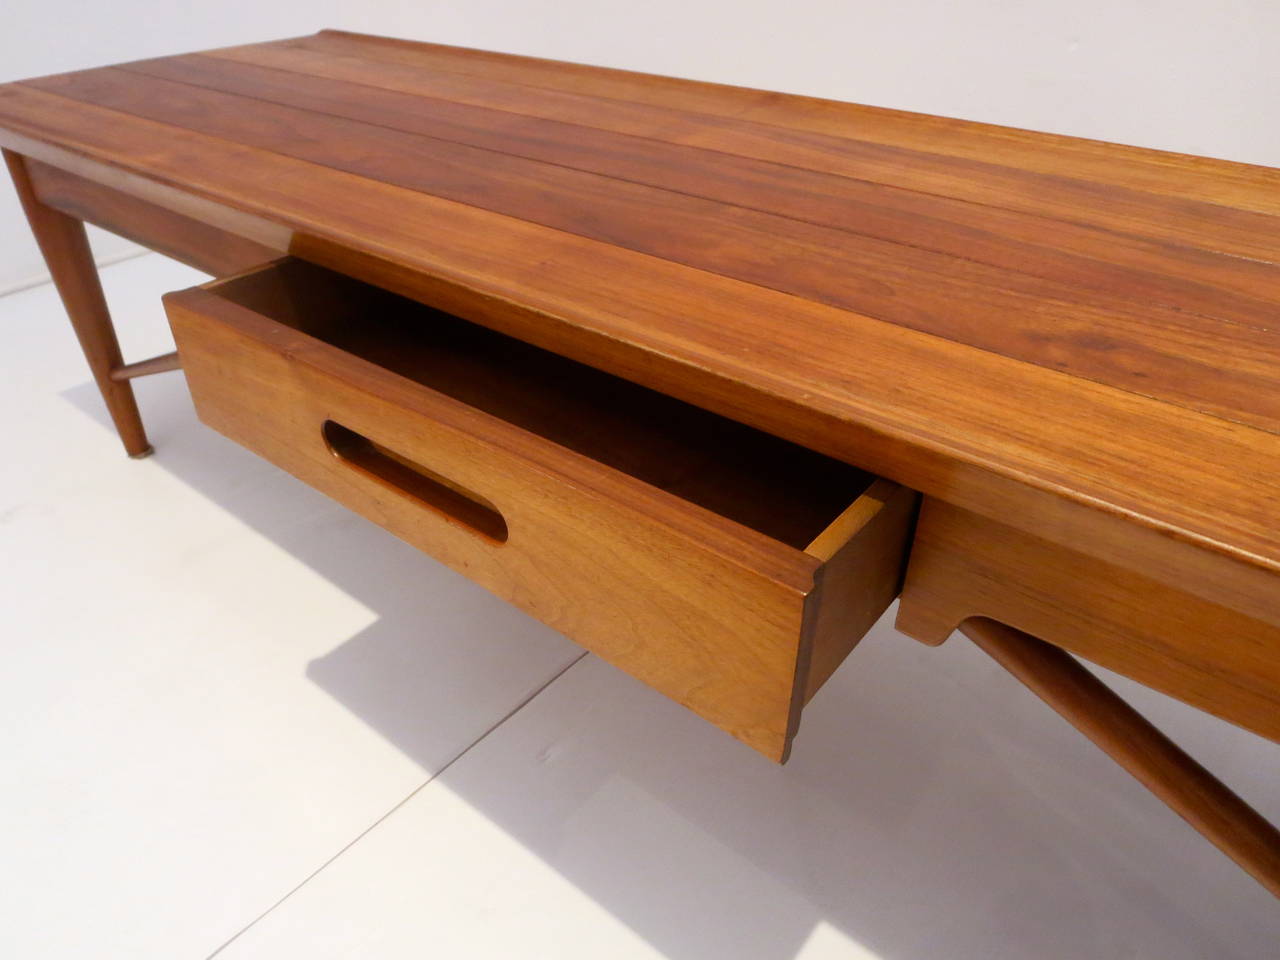 20th Century American Modern Solid Walnut Coffee Table by Heritage